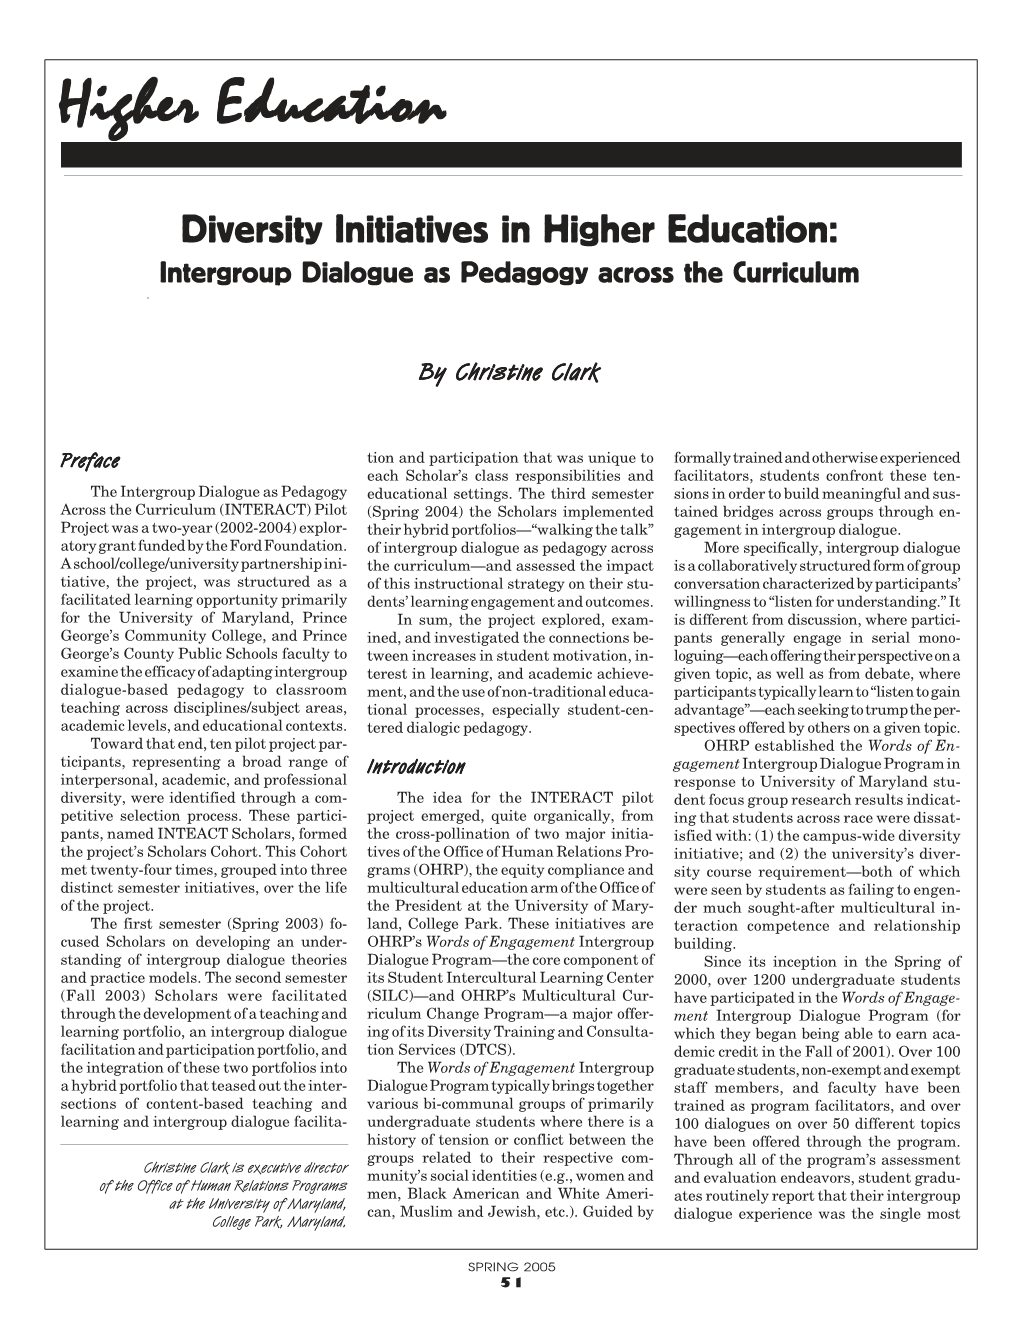 Diversity Initiatives in Higher Education: Intergroup Dialogue As Pedagogy Across the Curriculum